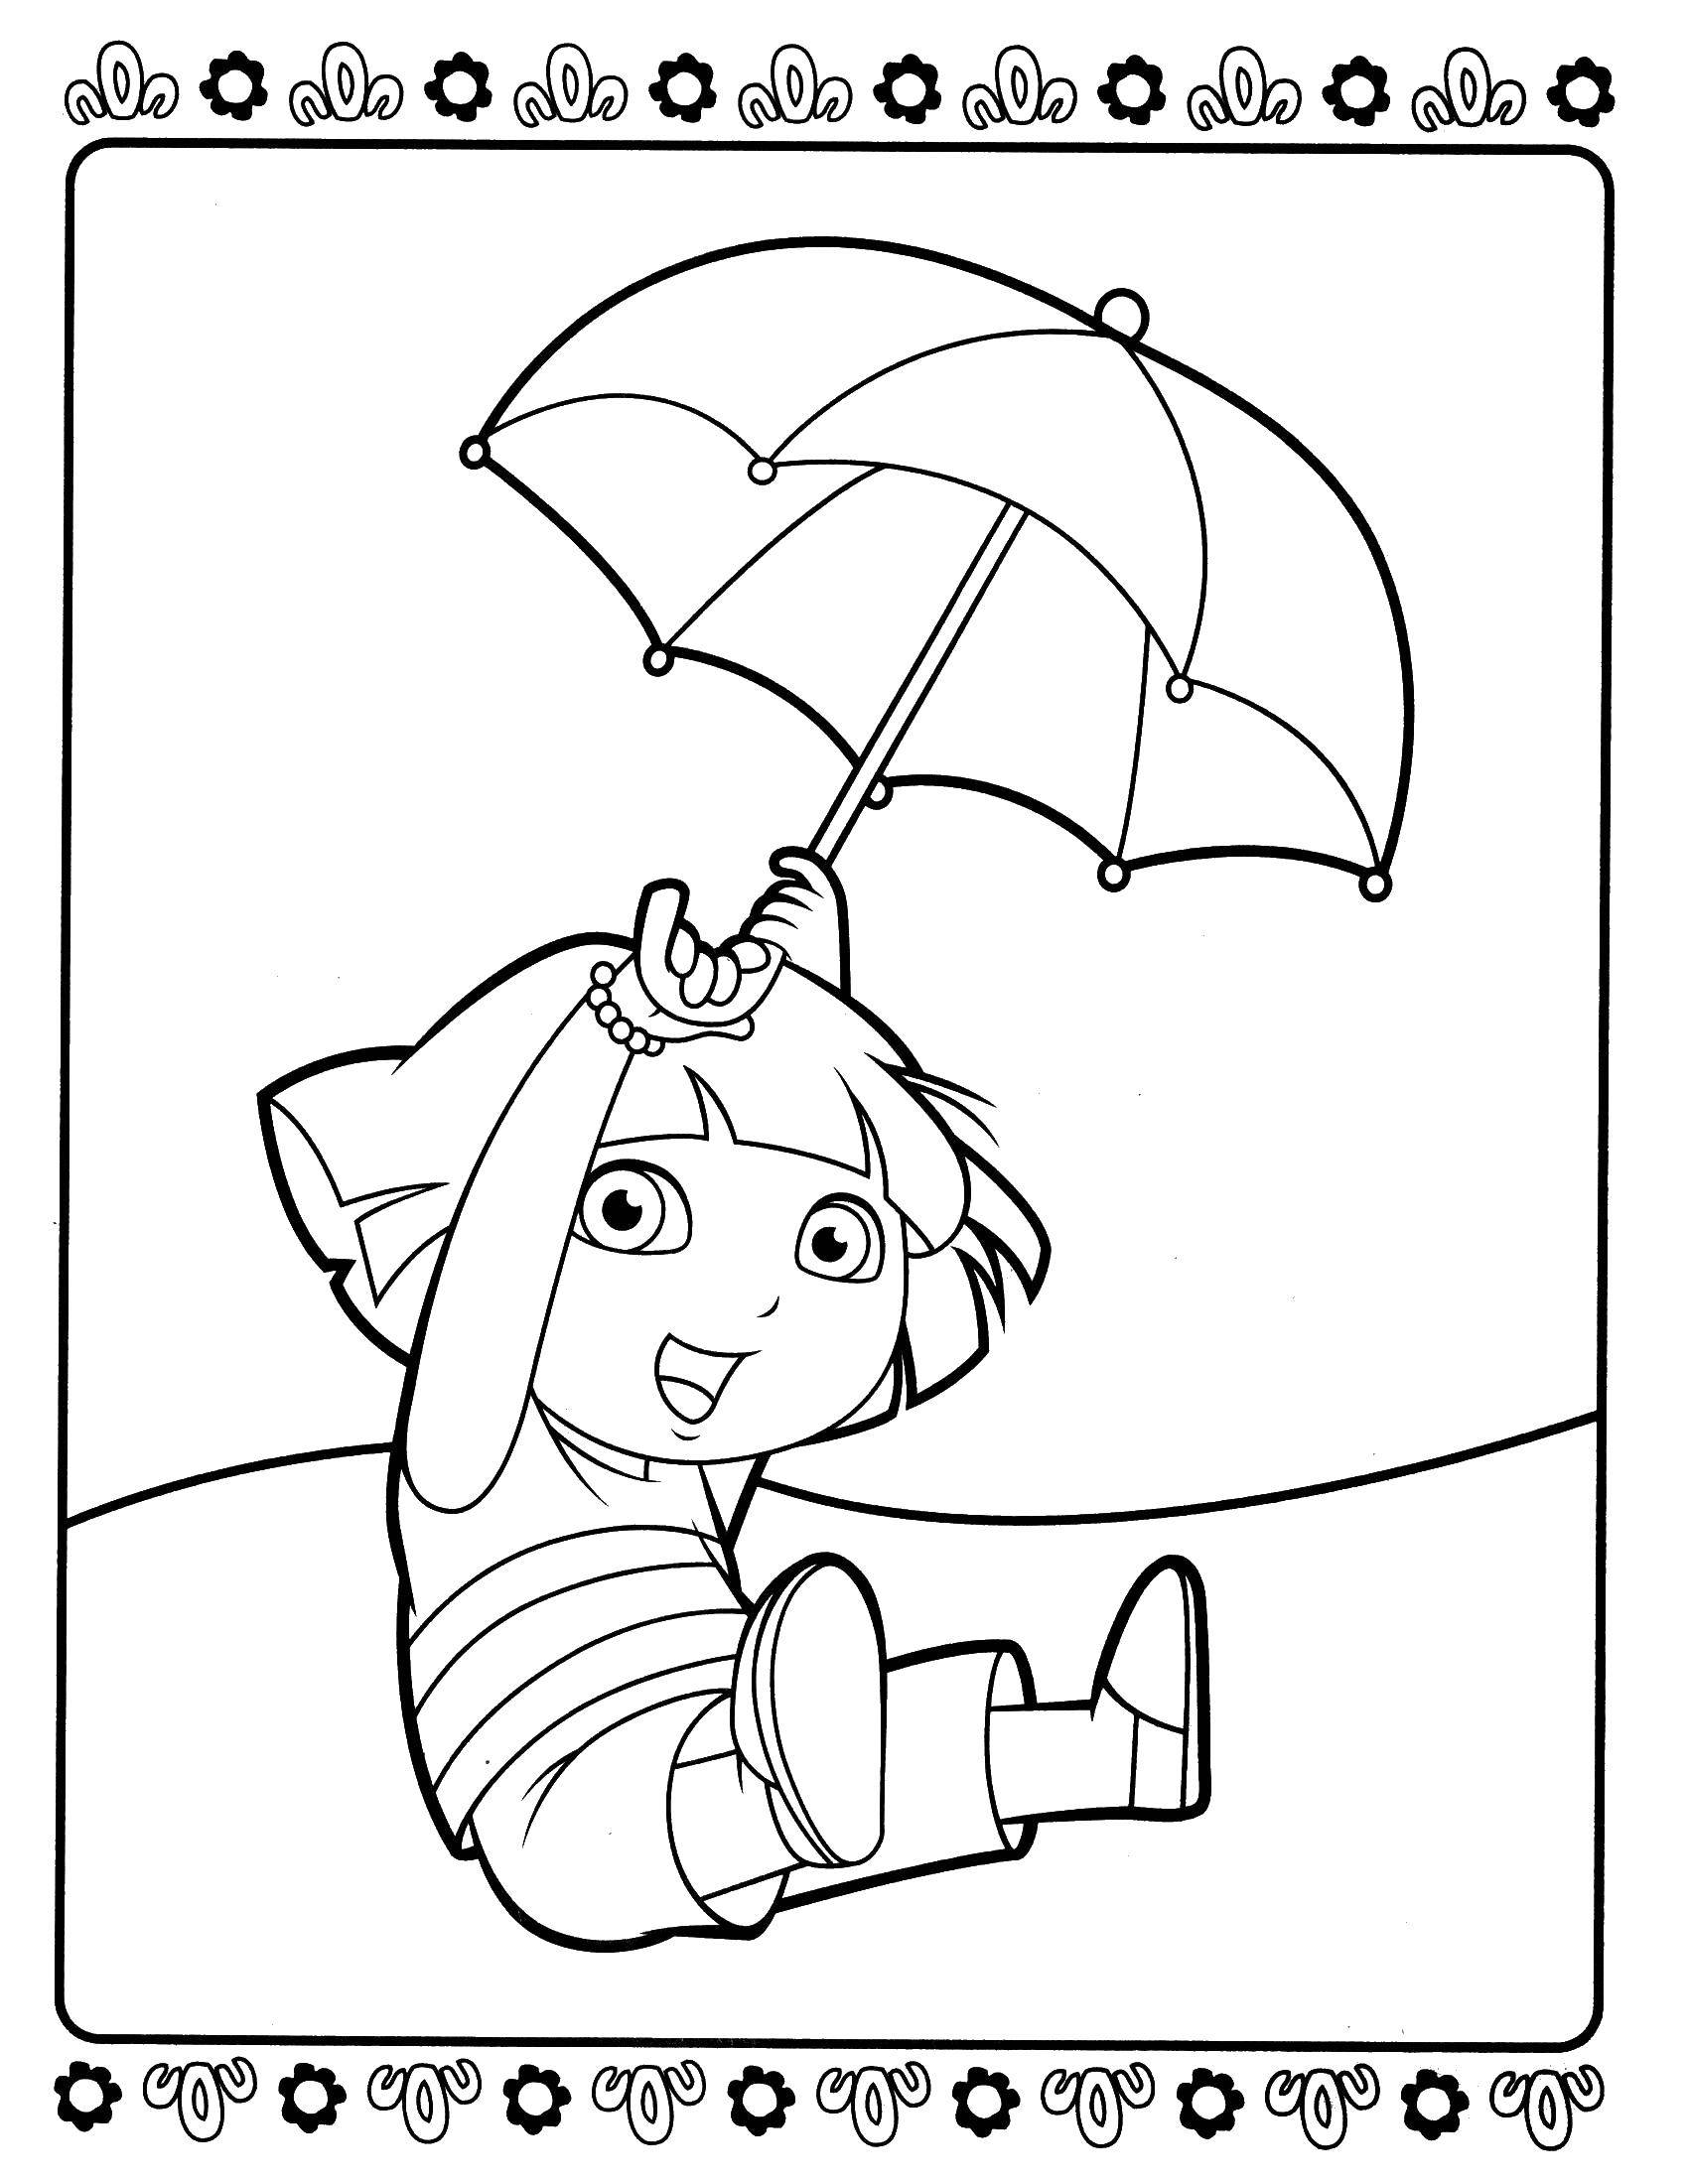 Coloring Dasha is flying on the umbrella. Category Dasha traveler. Tags:  Cartoon character.